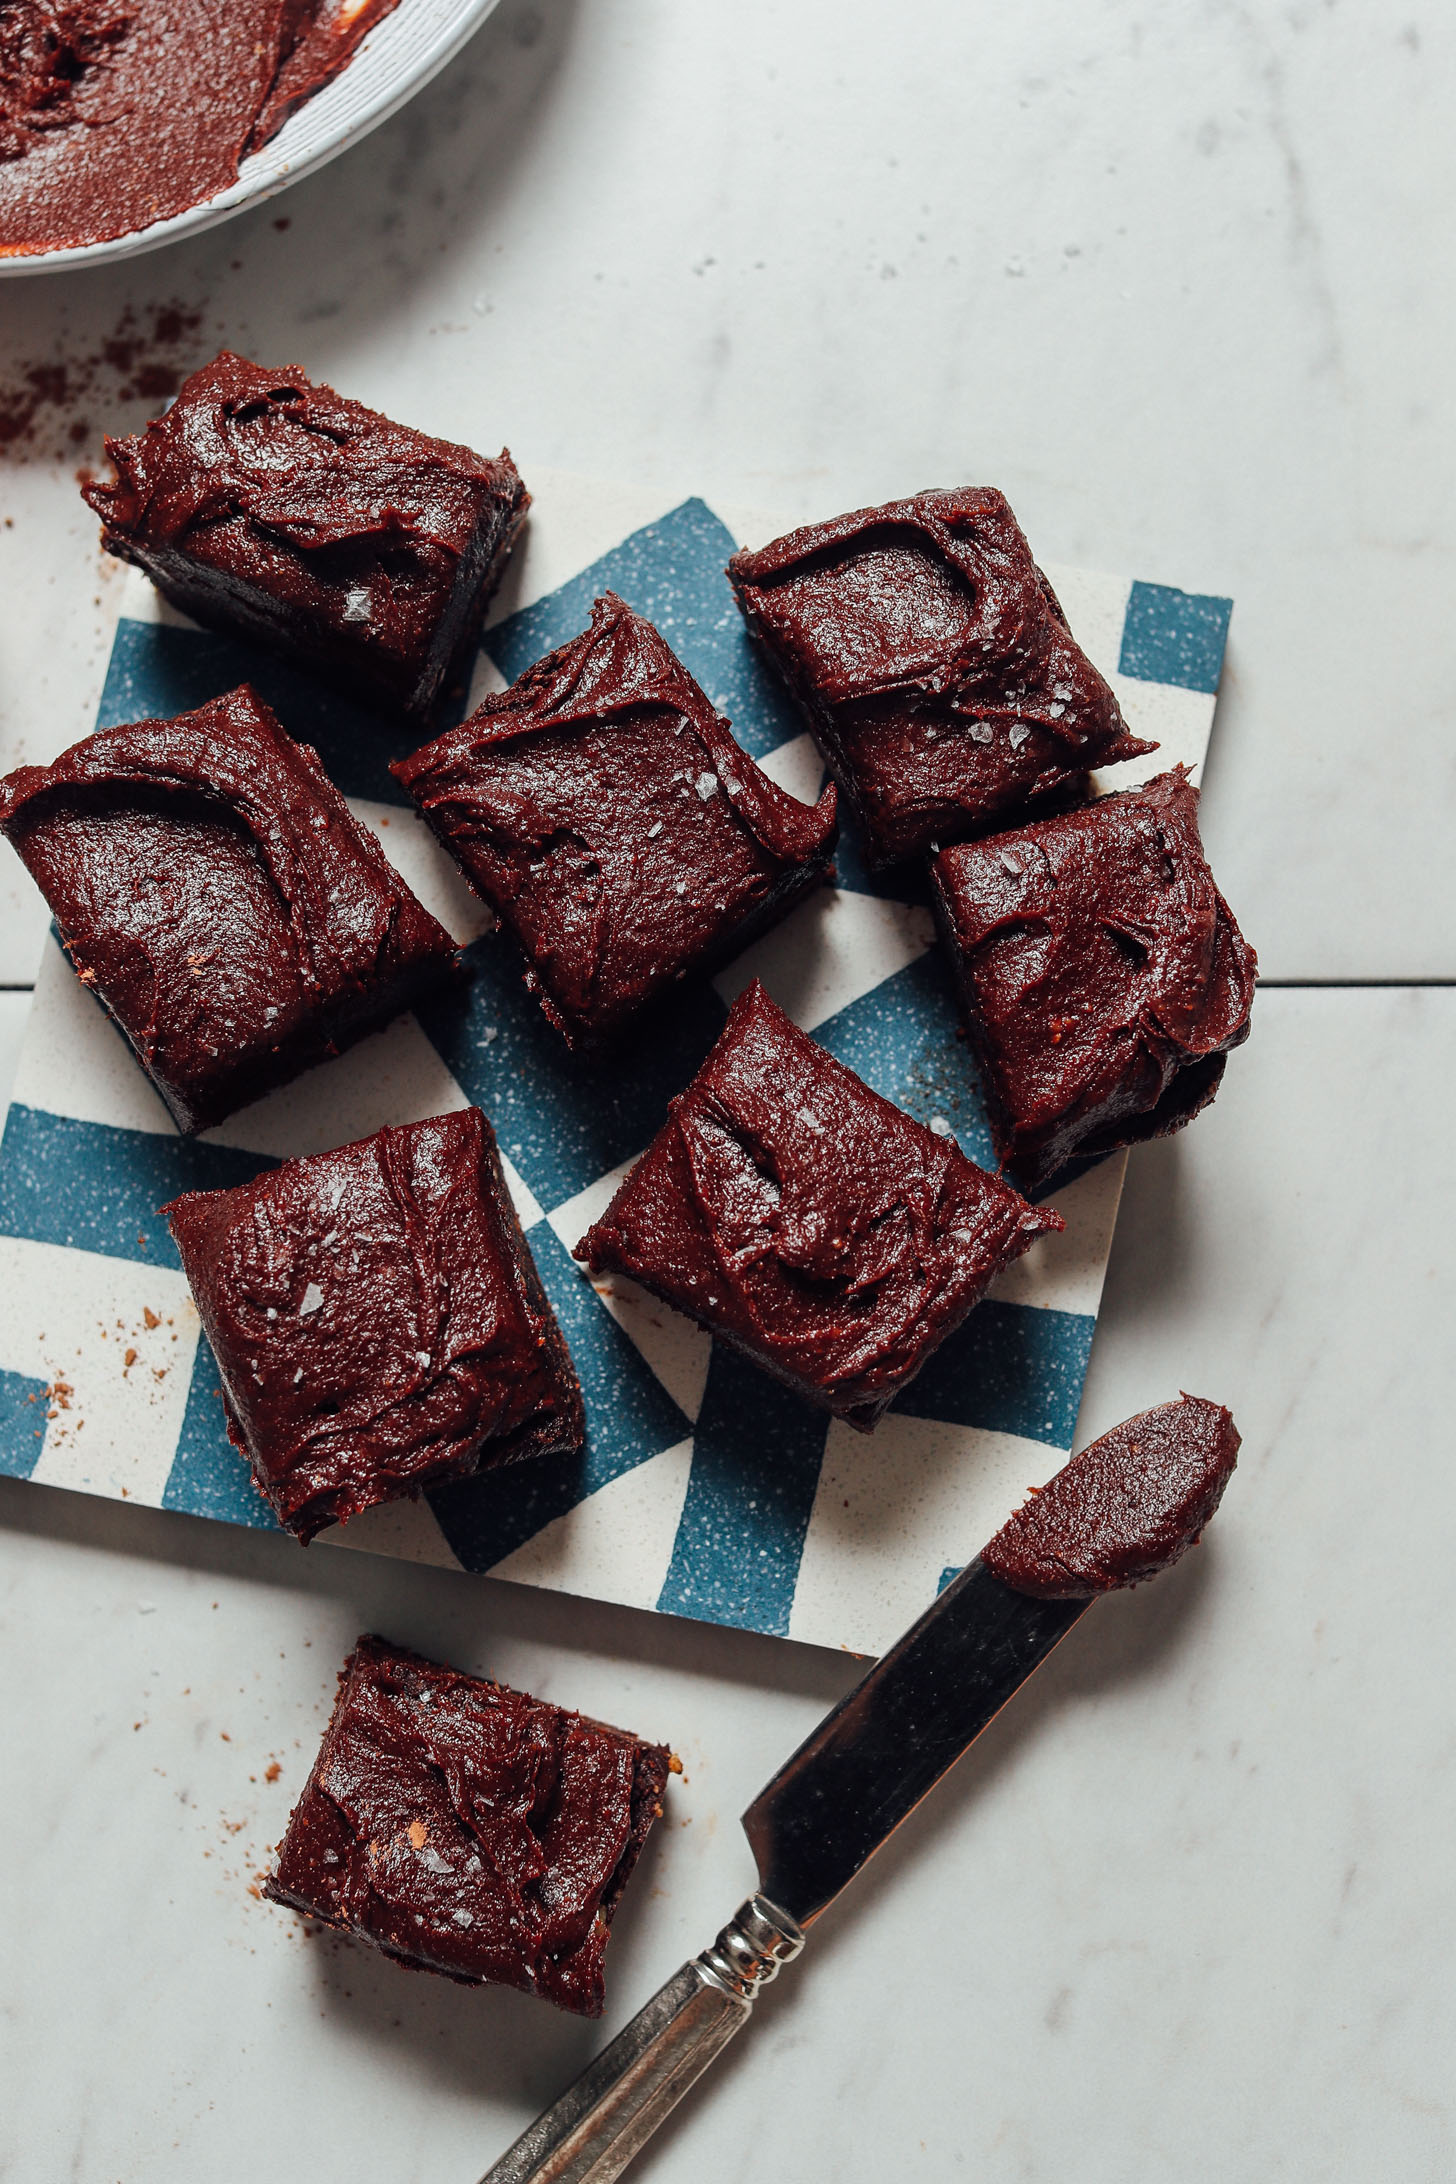 Date-sweetened Vegan Chocolate Frosting spread onto brownie squares